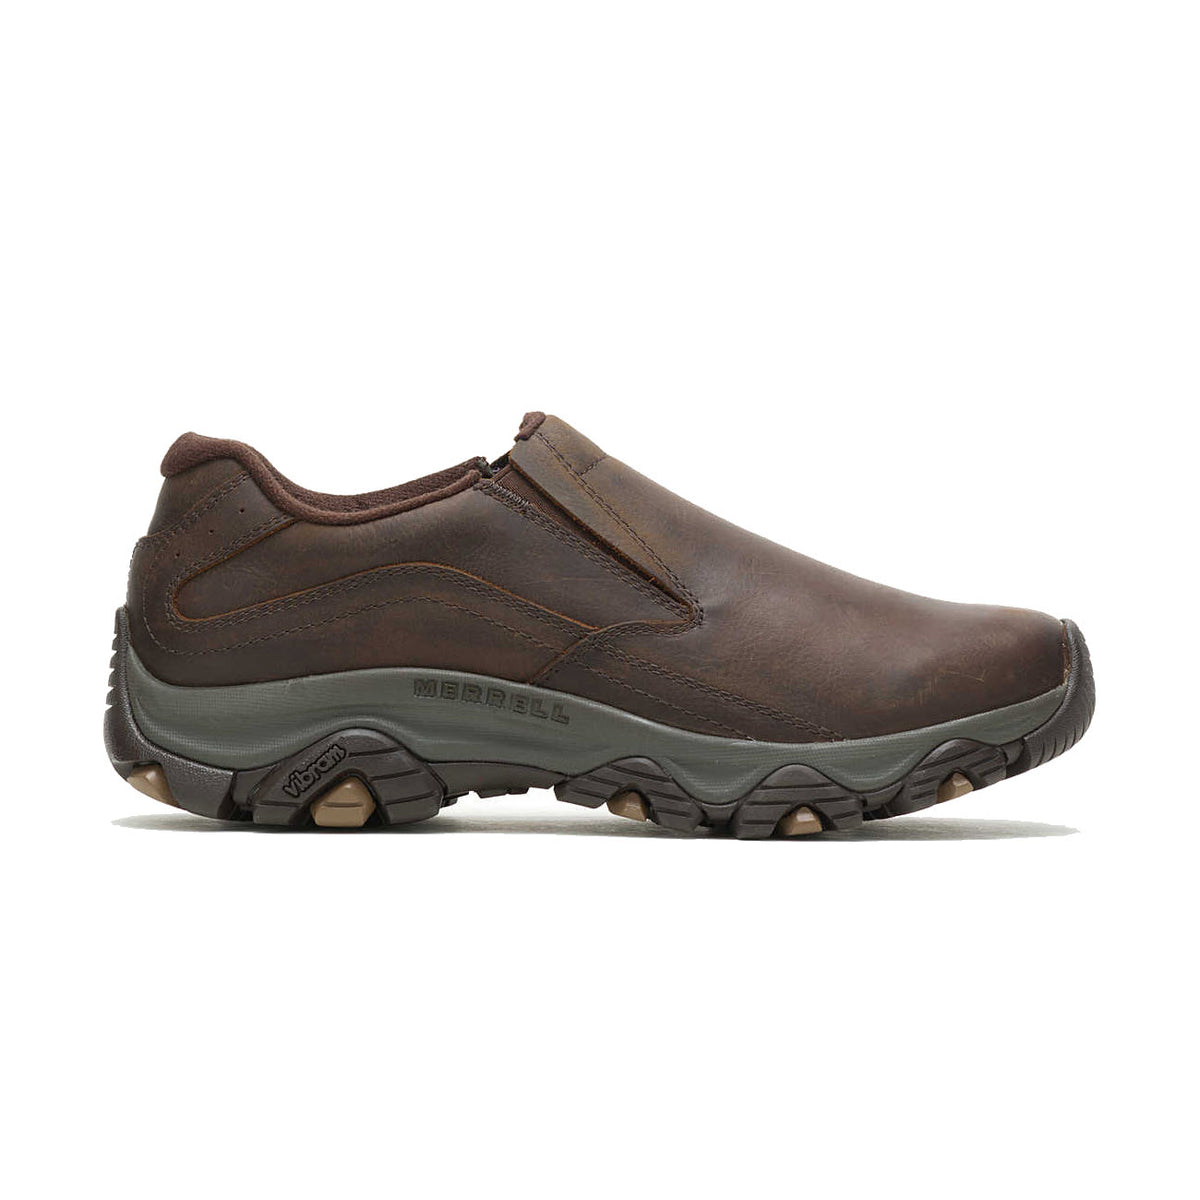 A brown waterproof full grain leather Merrell men&#39;s slip-on shoe with elastic side panels and a rugged rubber sole, displayed against a white background.